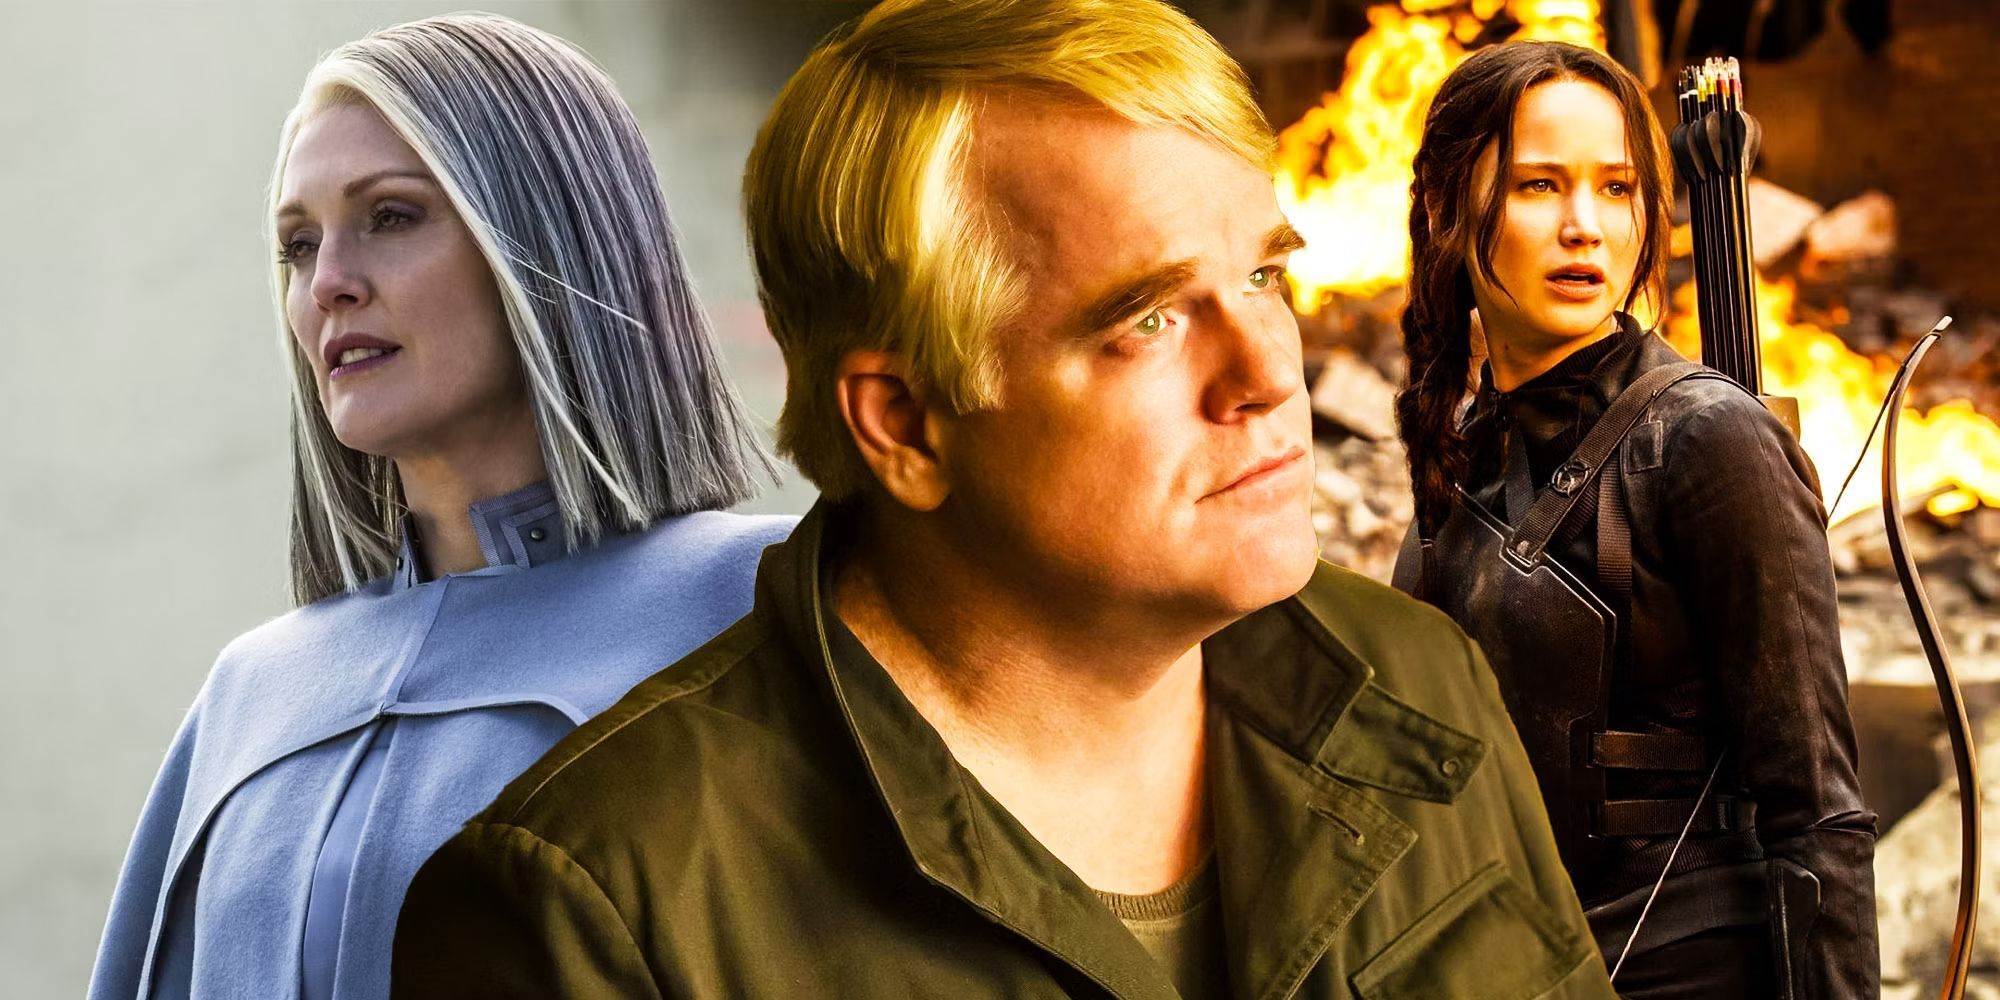 Is Plutarch Heavensbee Good In The Hunger Games? It's Complicated